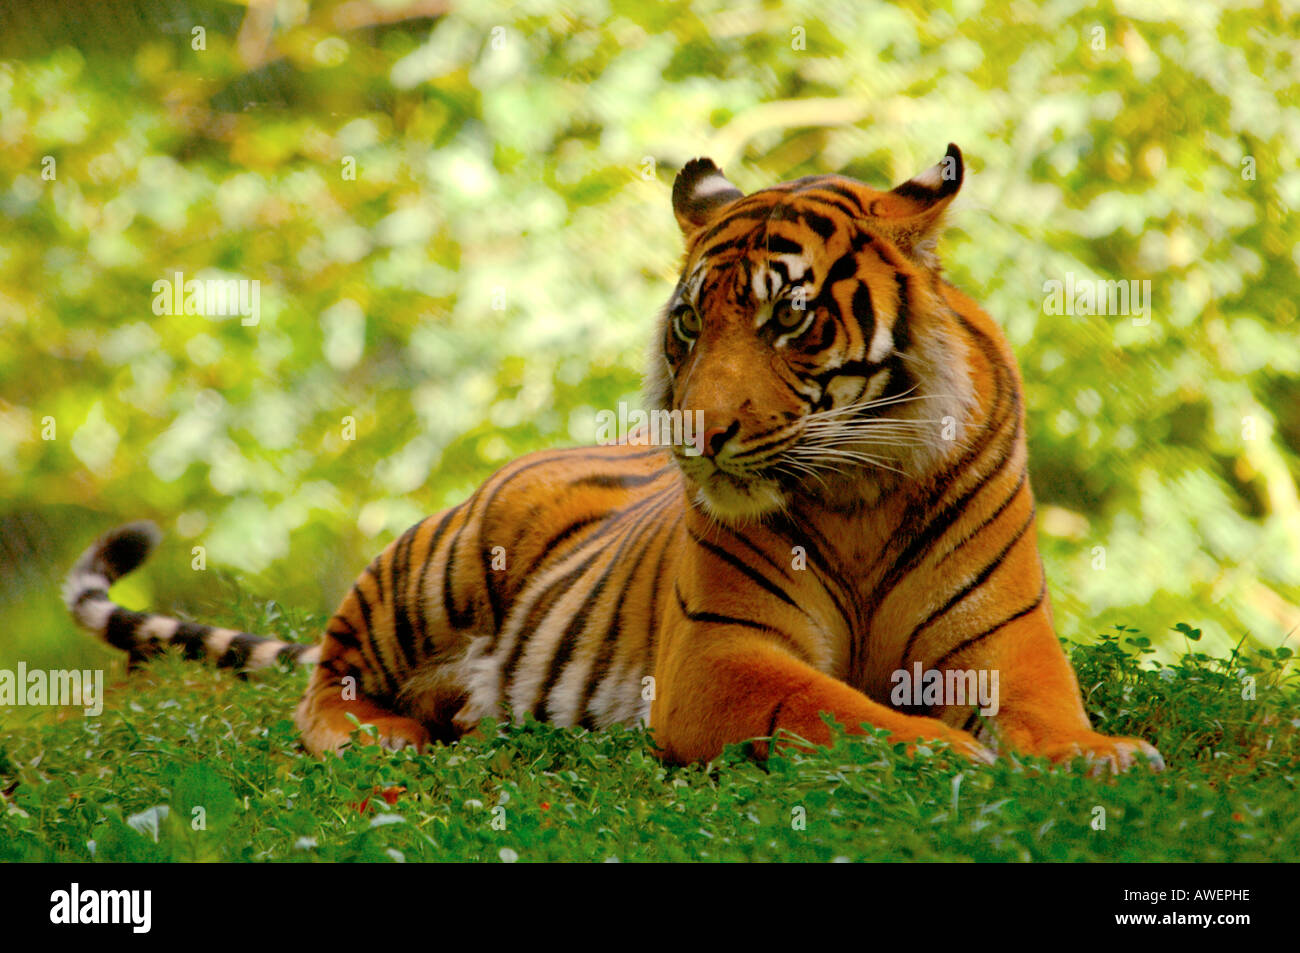 Adult Siberian Tiger looking alert resting on a grass bank with dappled light coming through trees behind Stock Photo